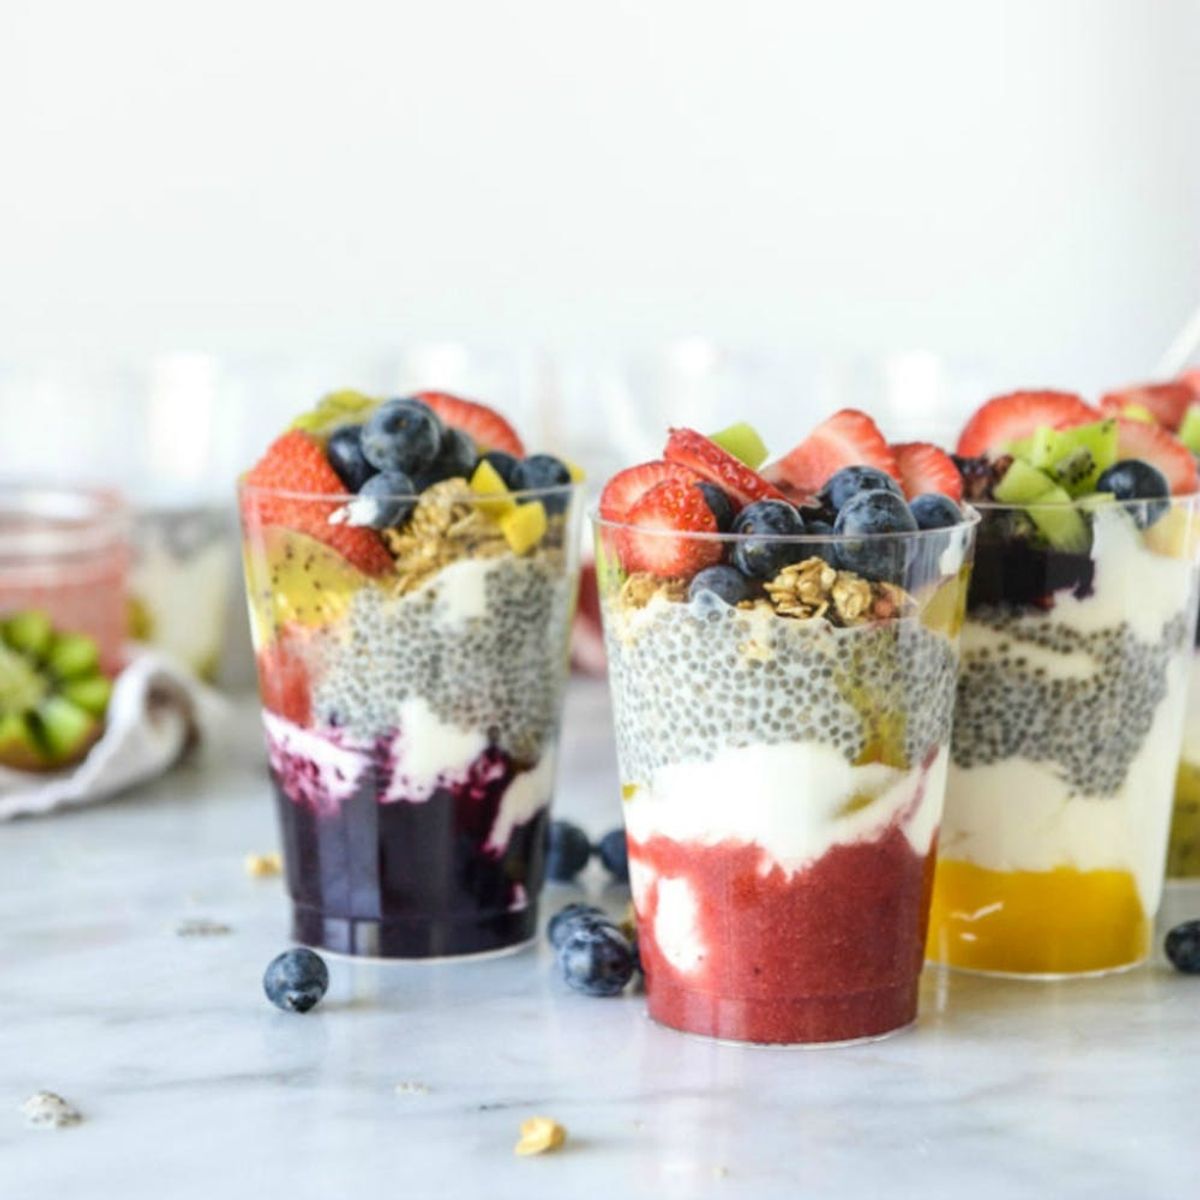 18 Make-Ahead Breakfast Hacks to Ease the Back-to-School Transition